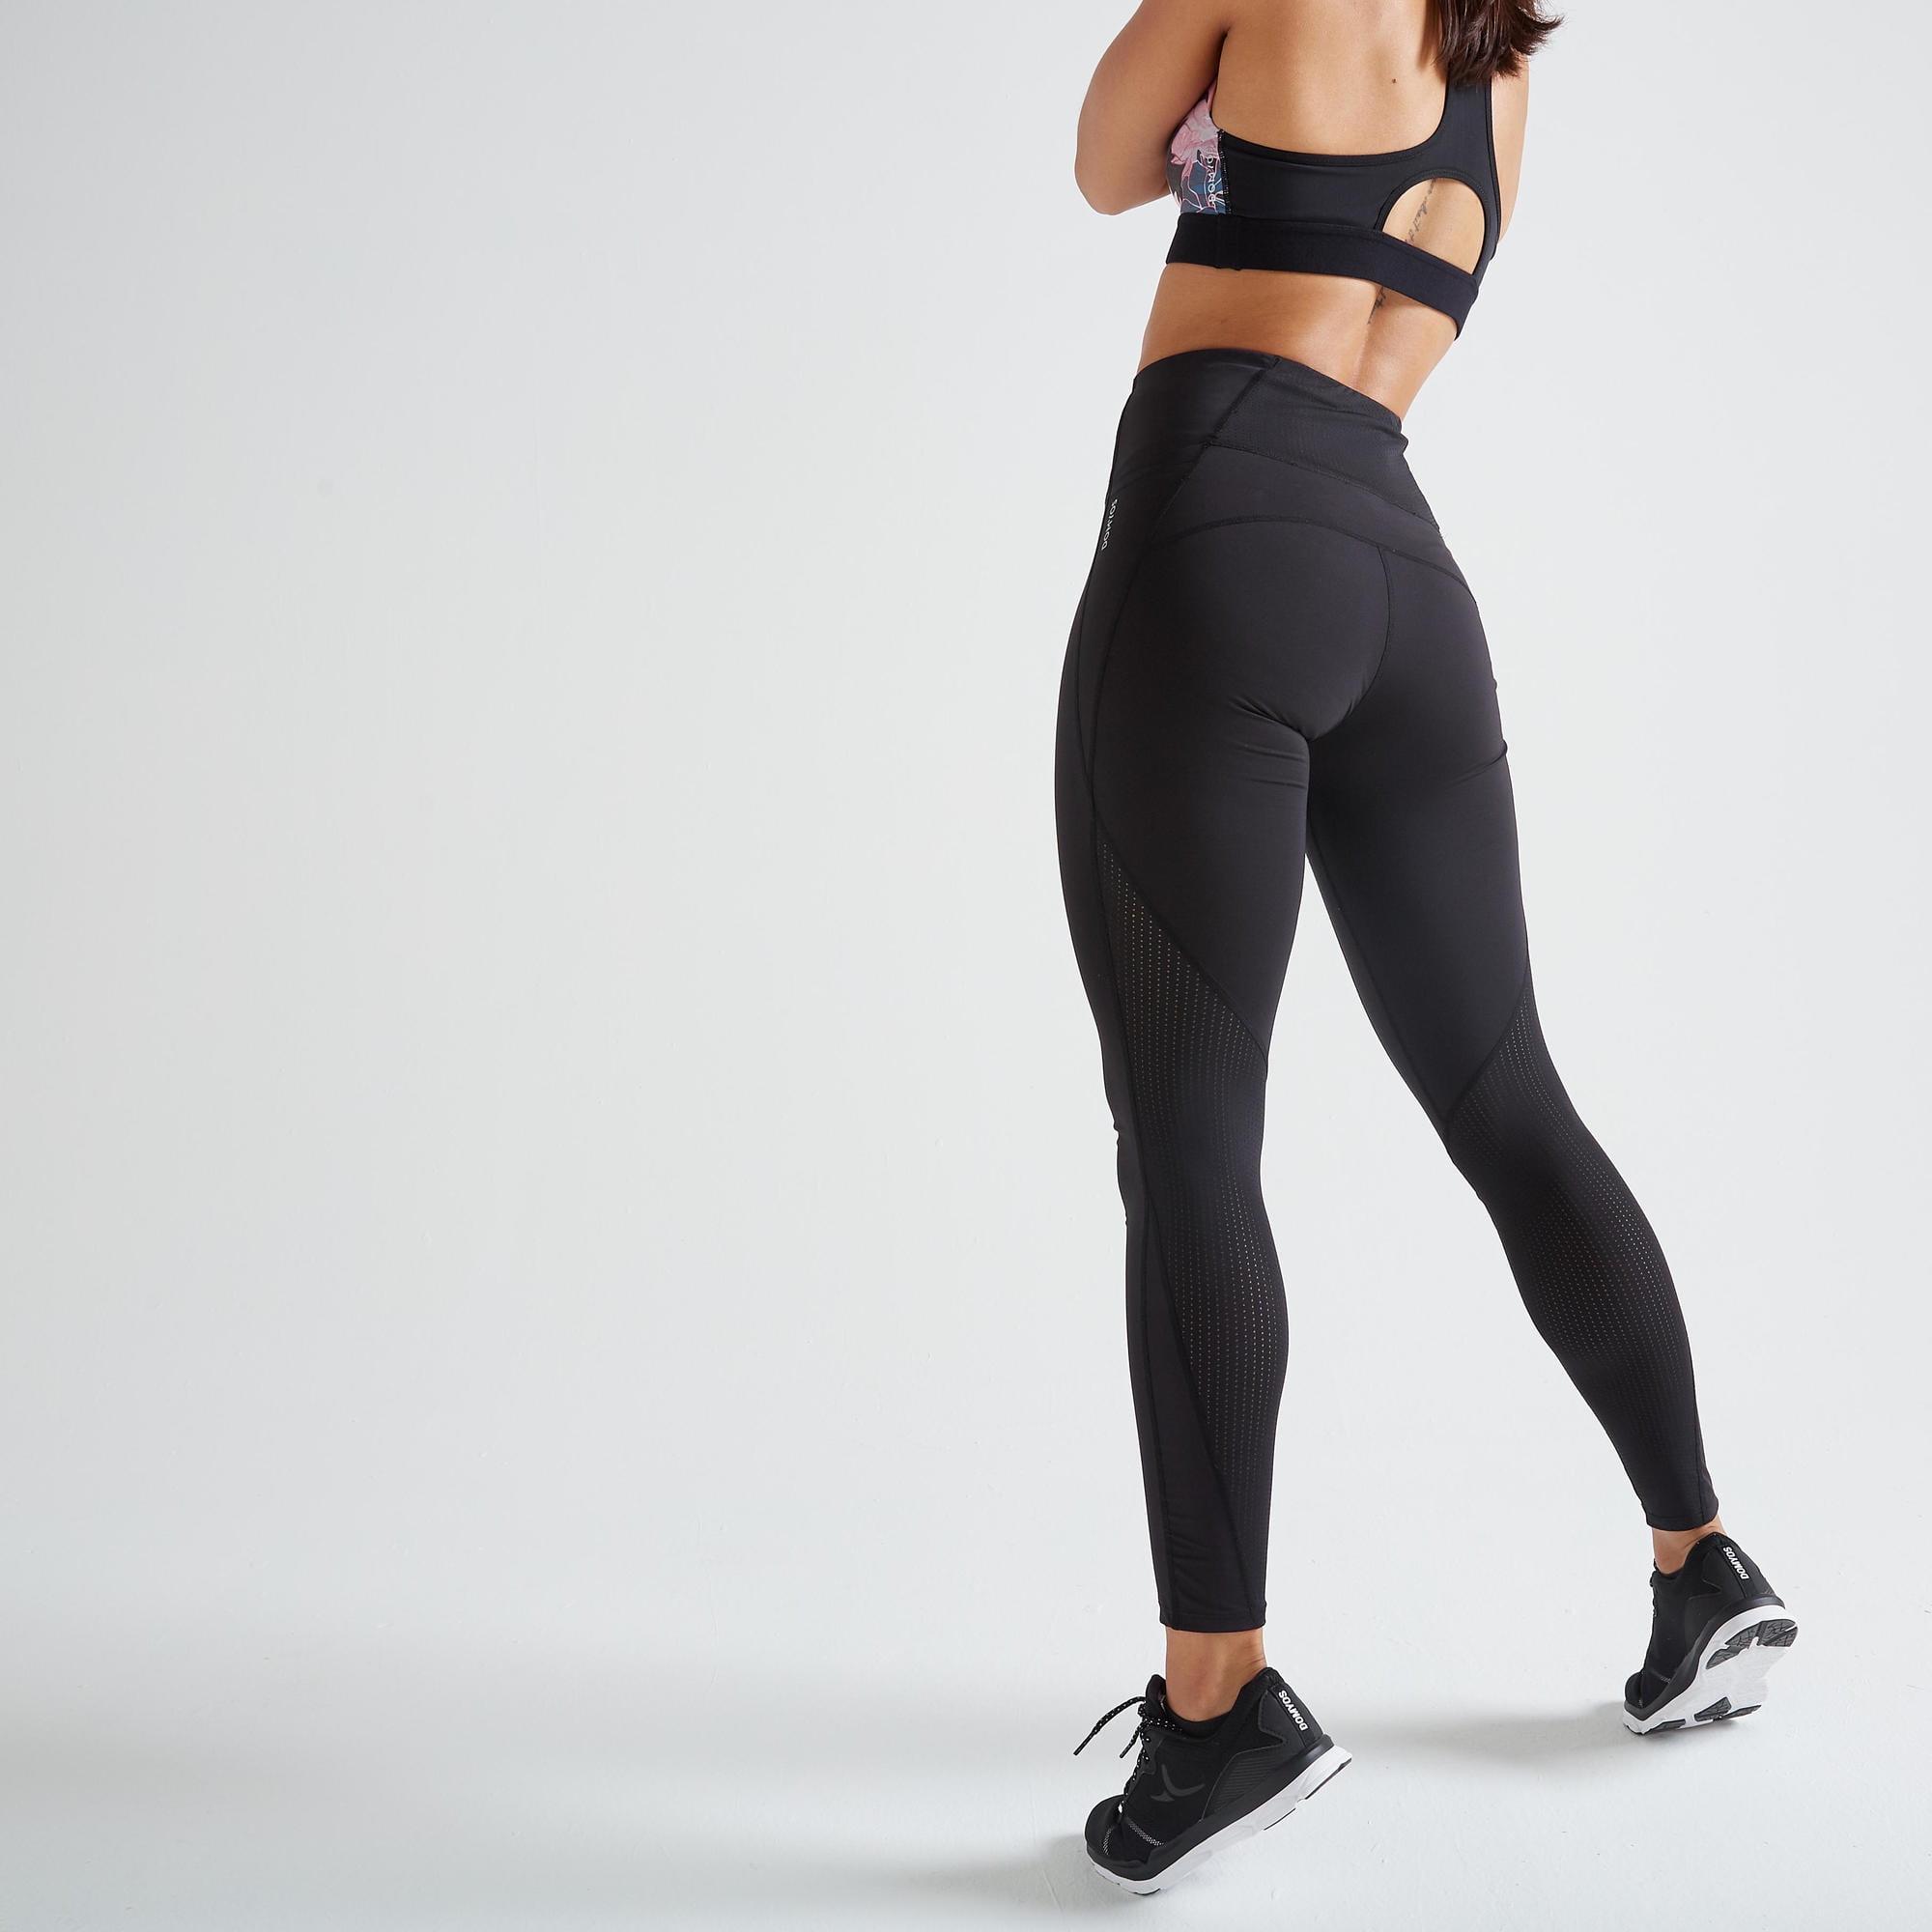 Womens High Street Nude Decathlon Yoga Pants Solid Skinny Stretch Trousers  For Autumn Club And Streetwear Hot H1221 From Mengyang10, $11.95 |  DHgate.Com